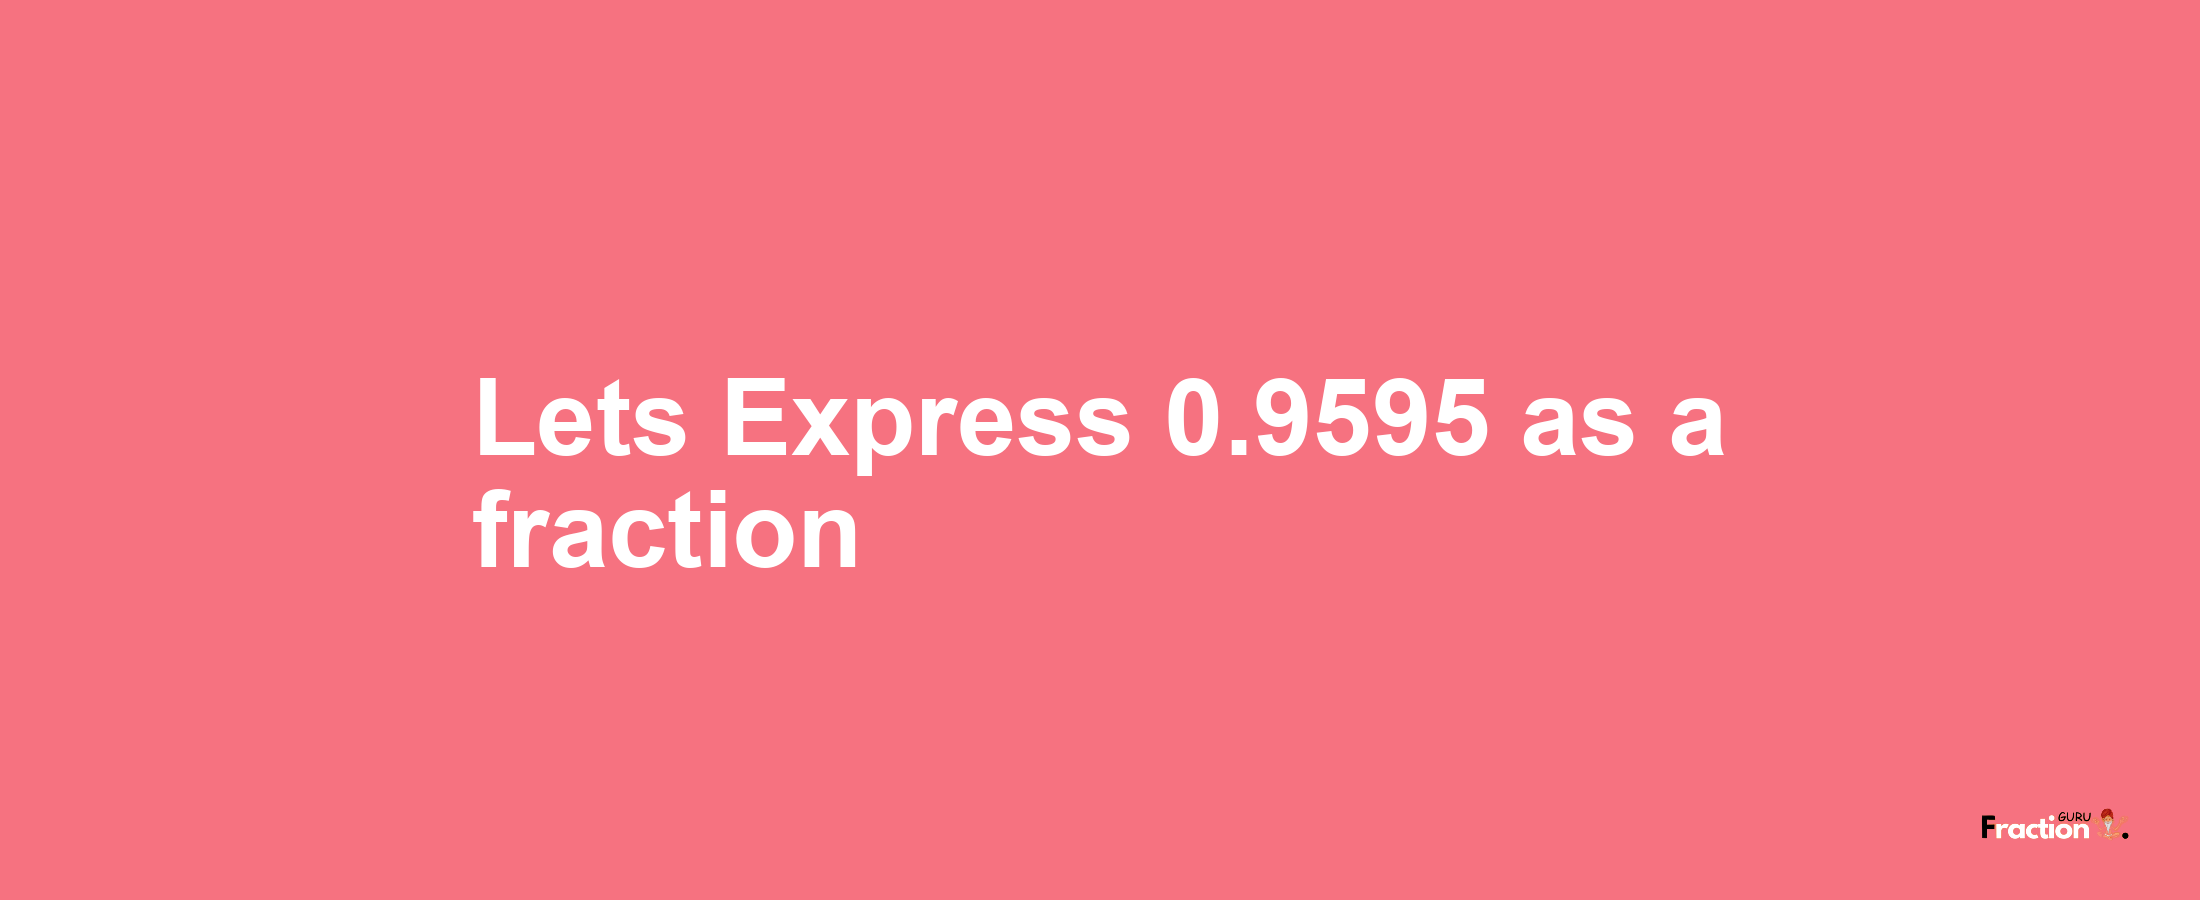 Lets Express 0.9595 as afraction